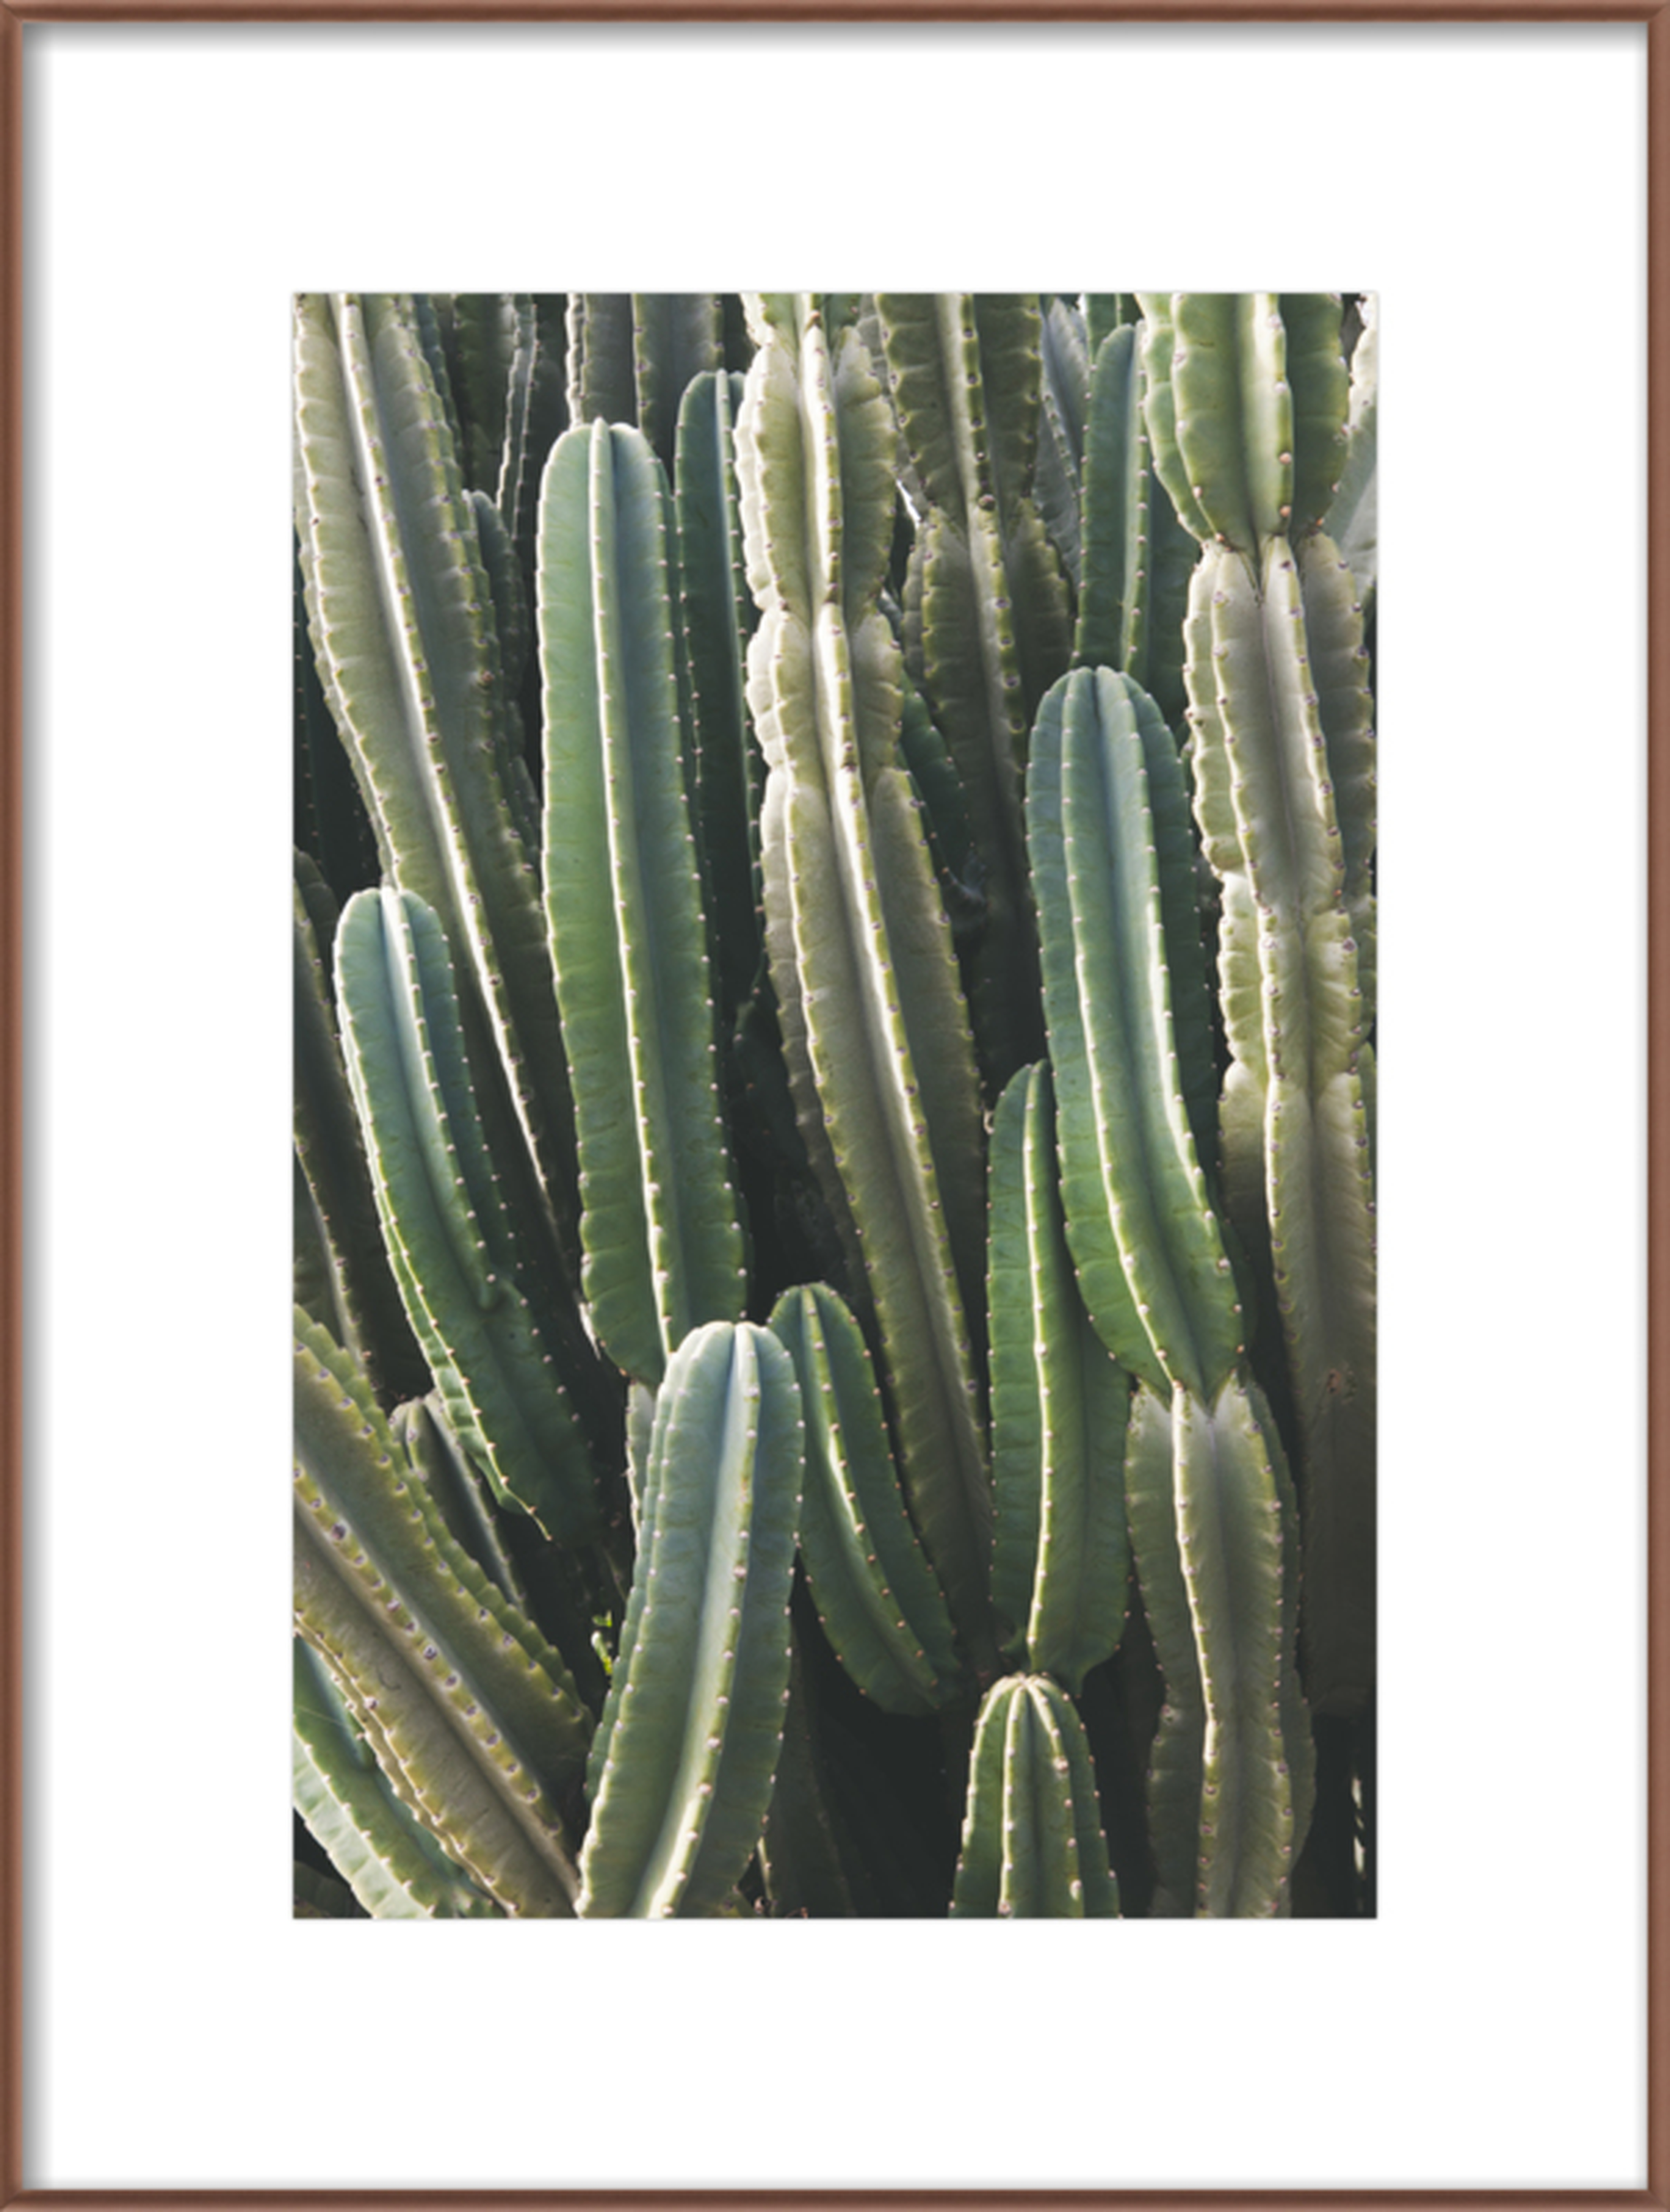 Southwest Cactus by Catherine McDonald for Artfully Walls - Artfully Walls